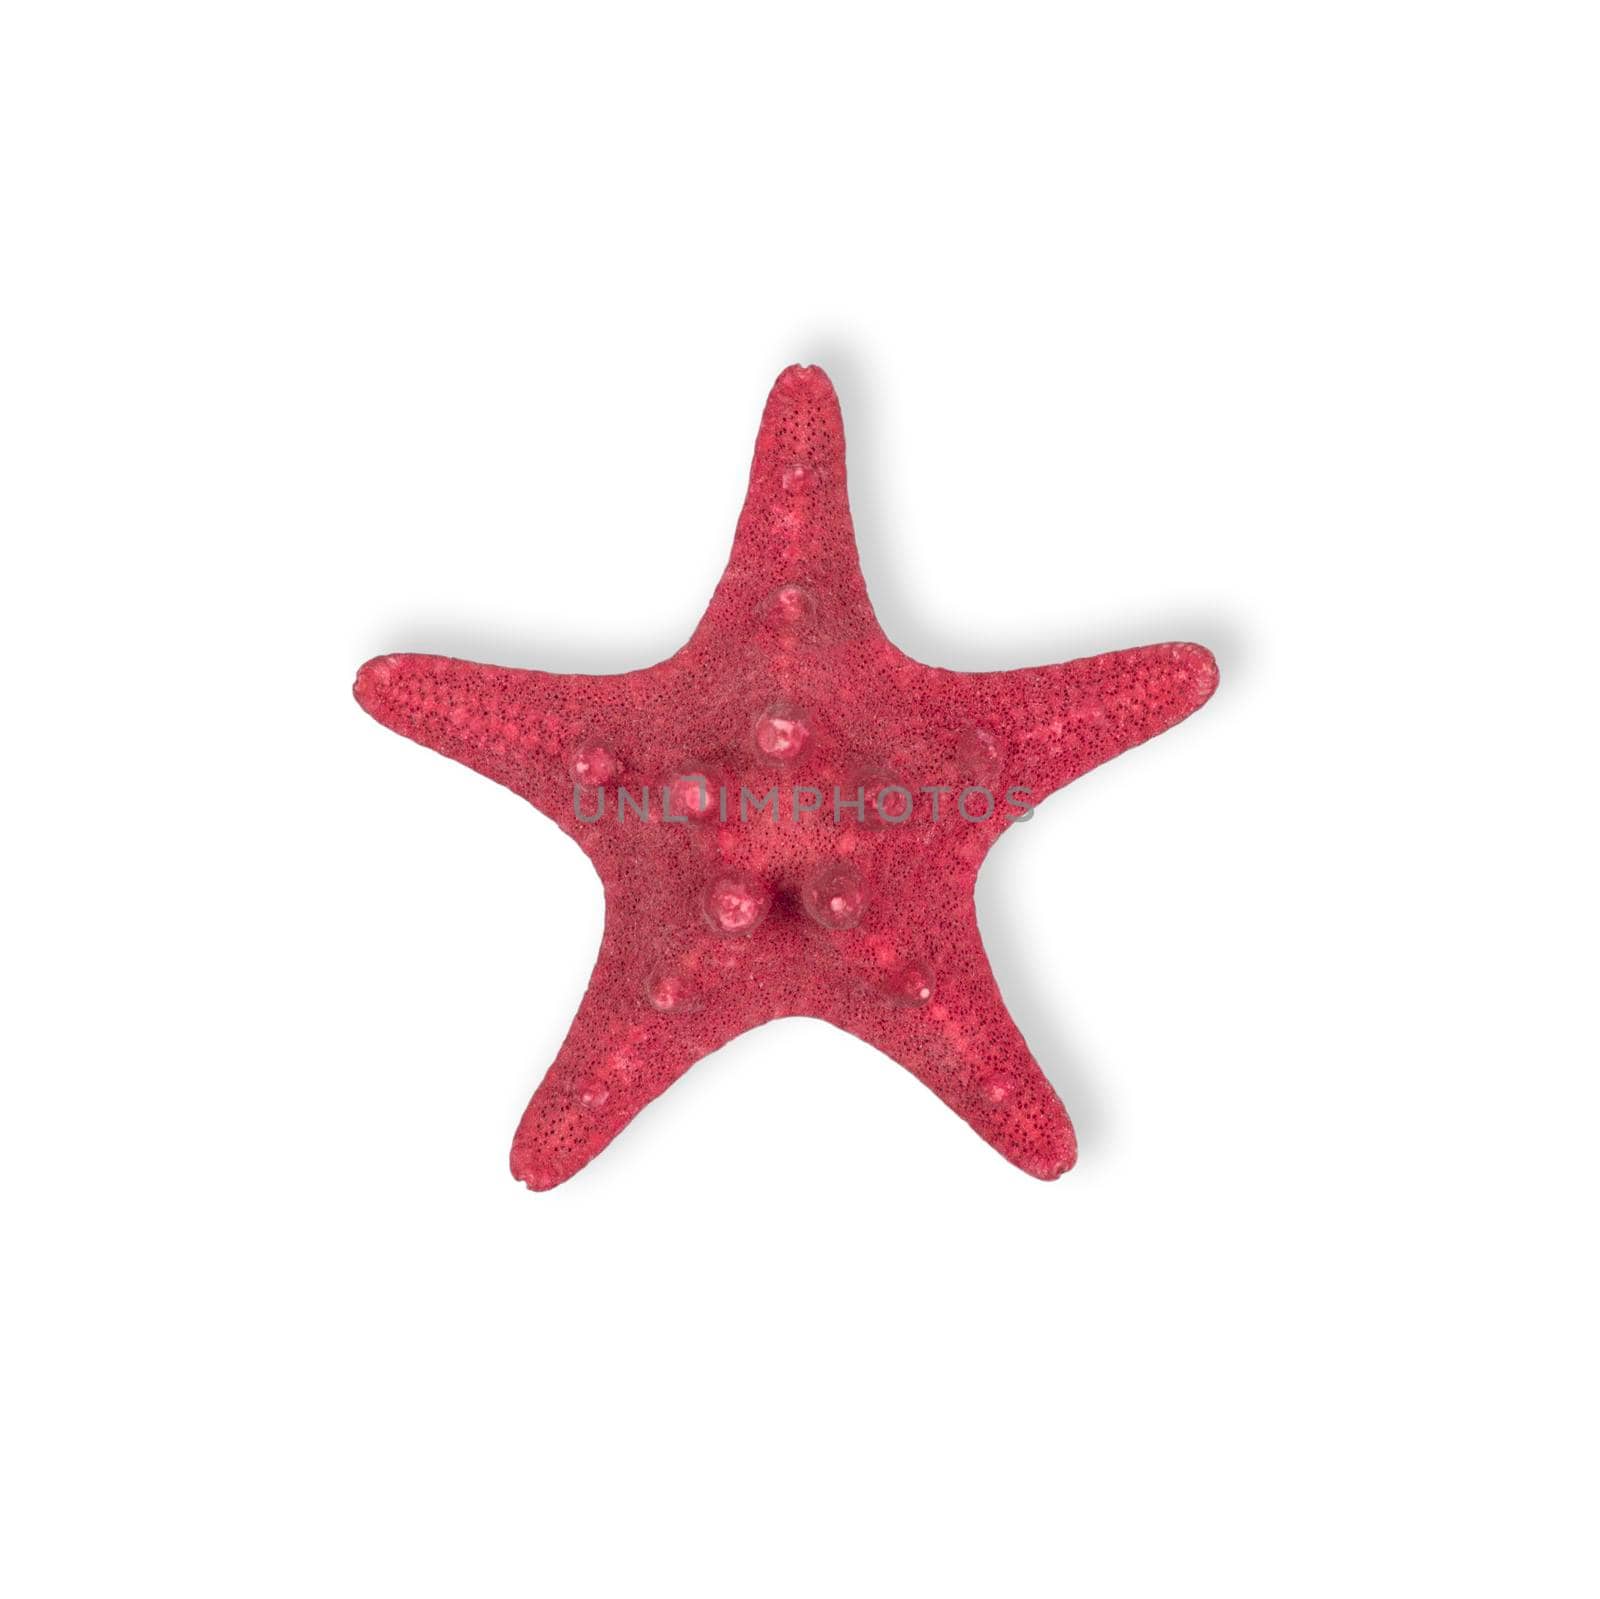 Dried Red sea star fish isolated on white background. by esvetleishaya